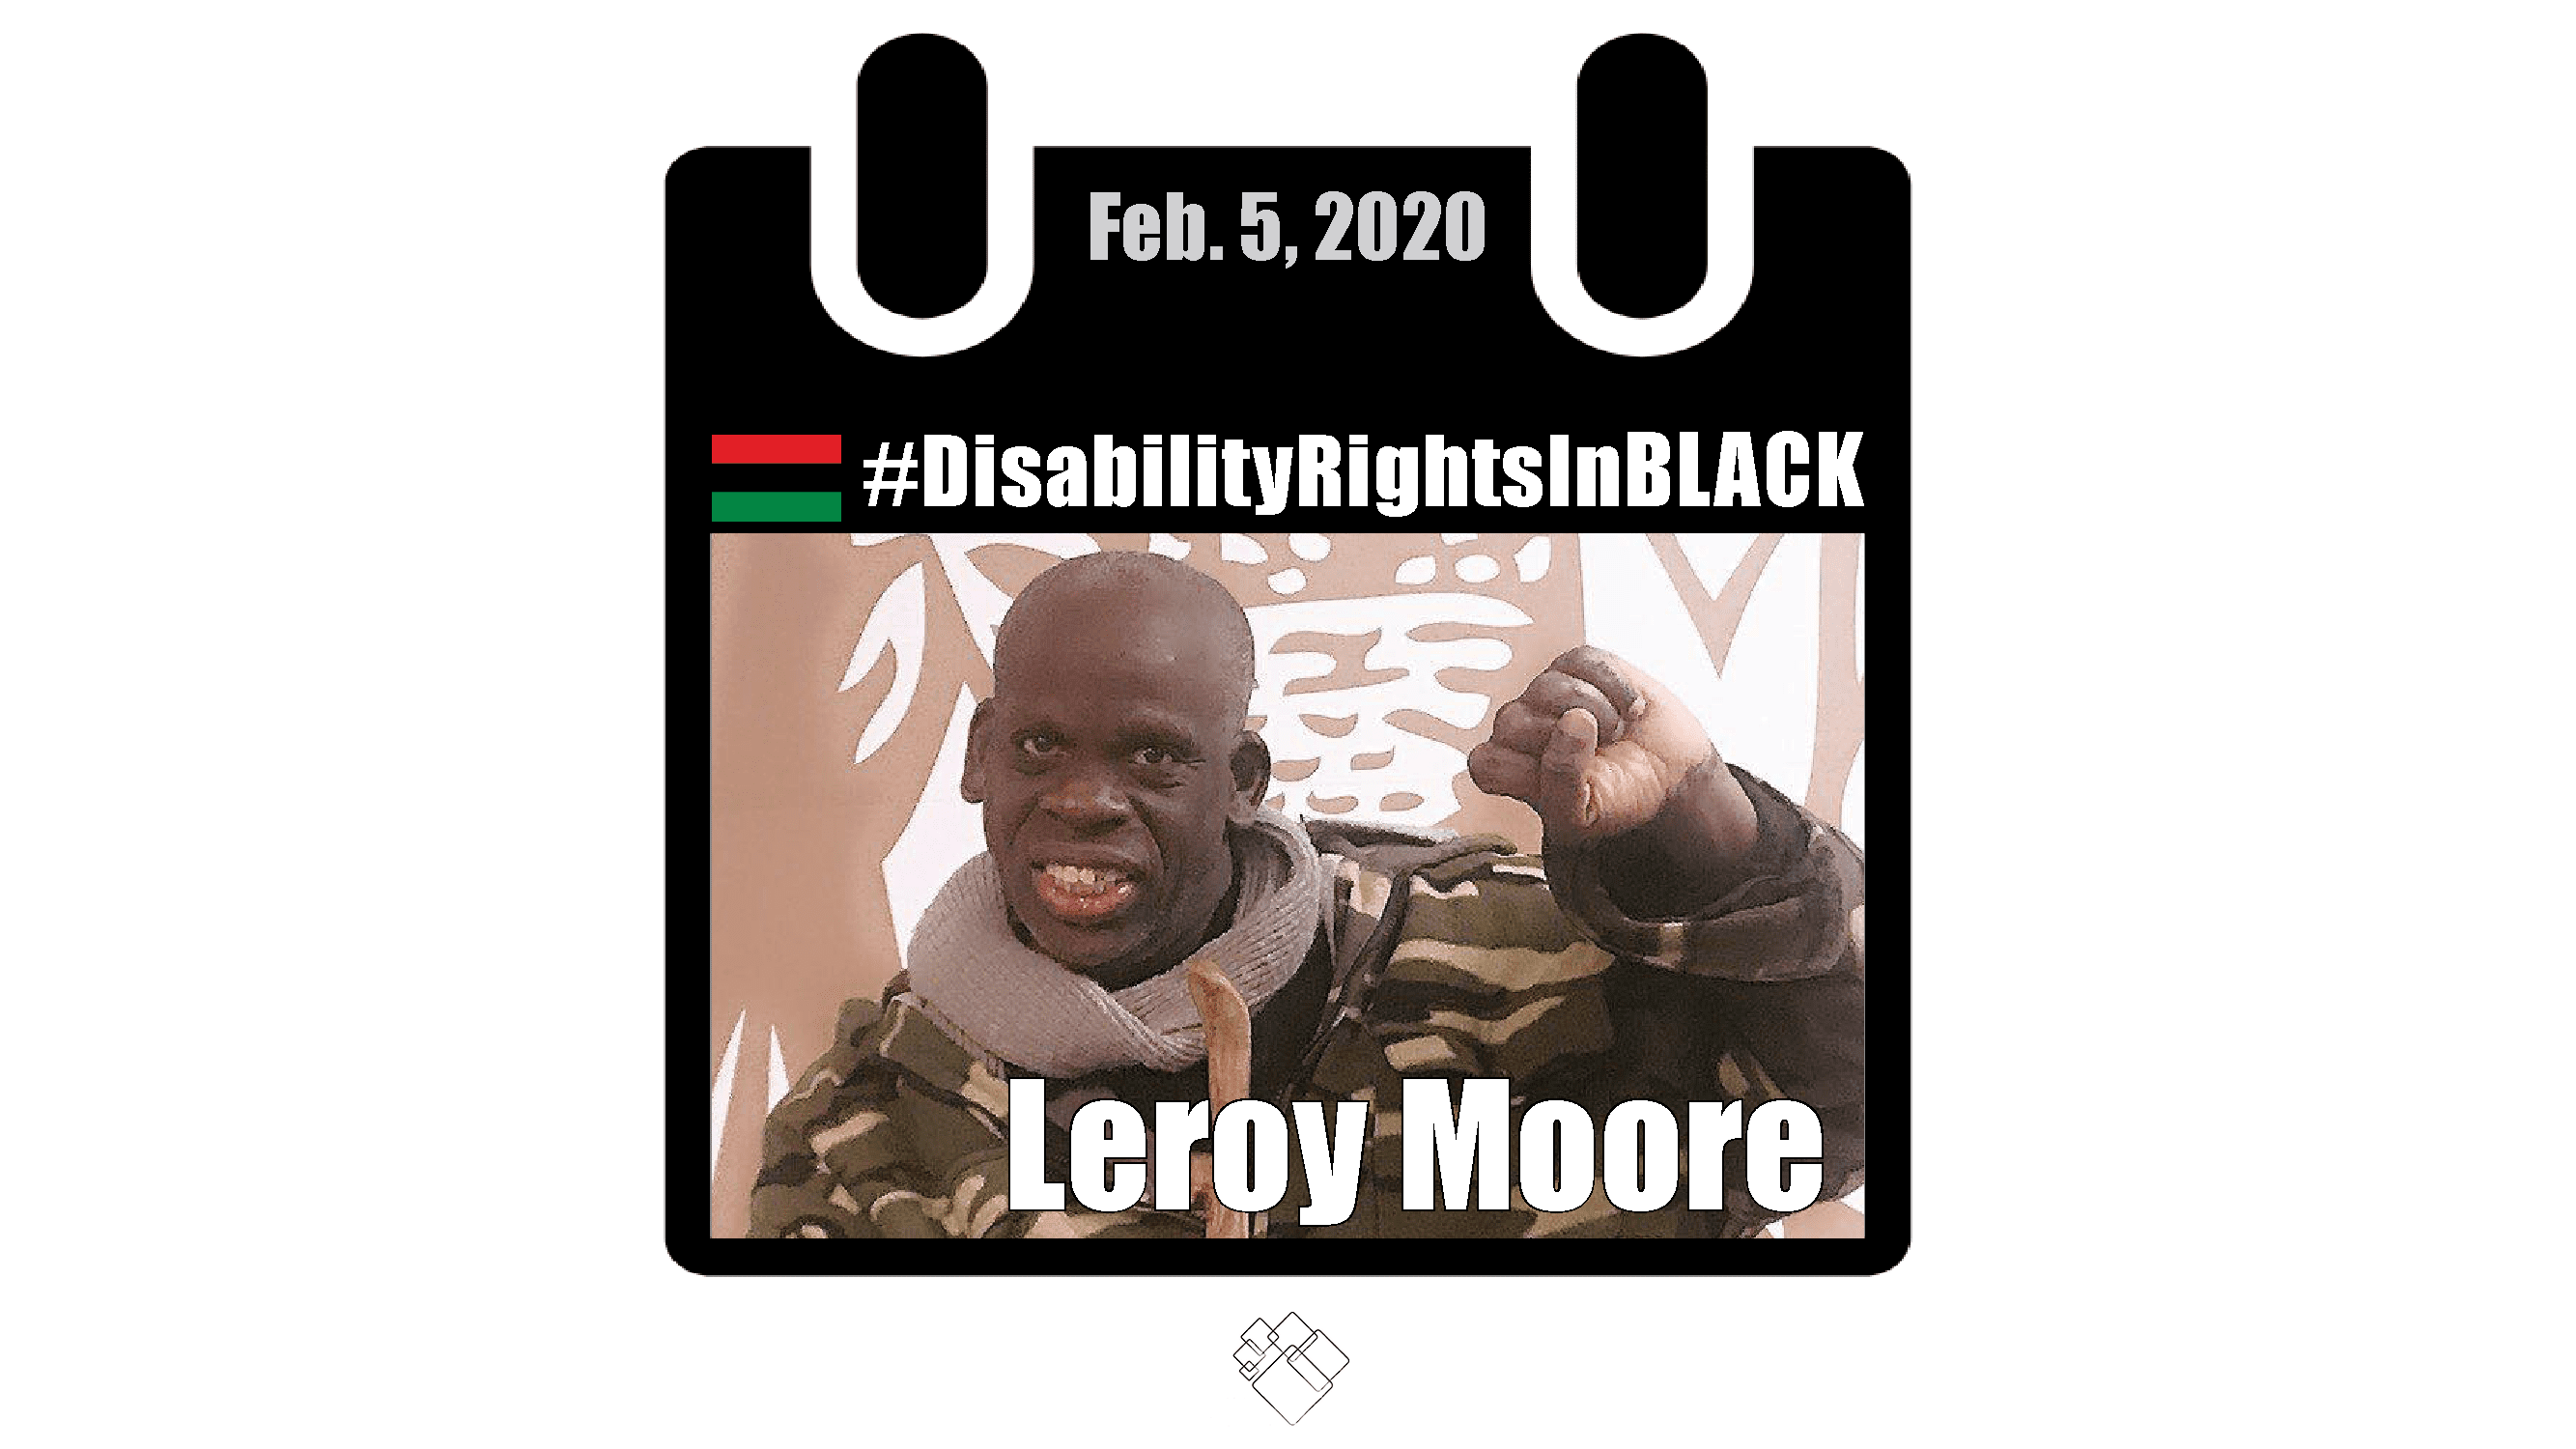 Leroy raises his fist and smiles at the camera. The Disability Rights in Black calendar frames the photo.